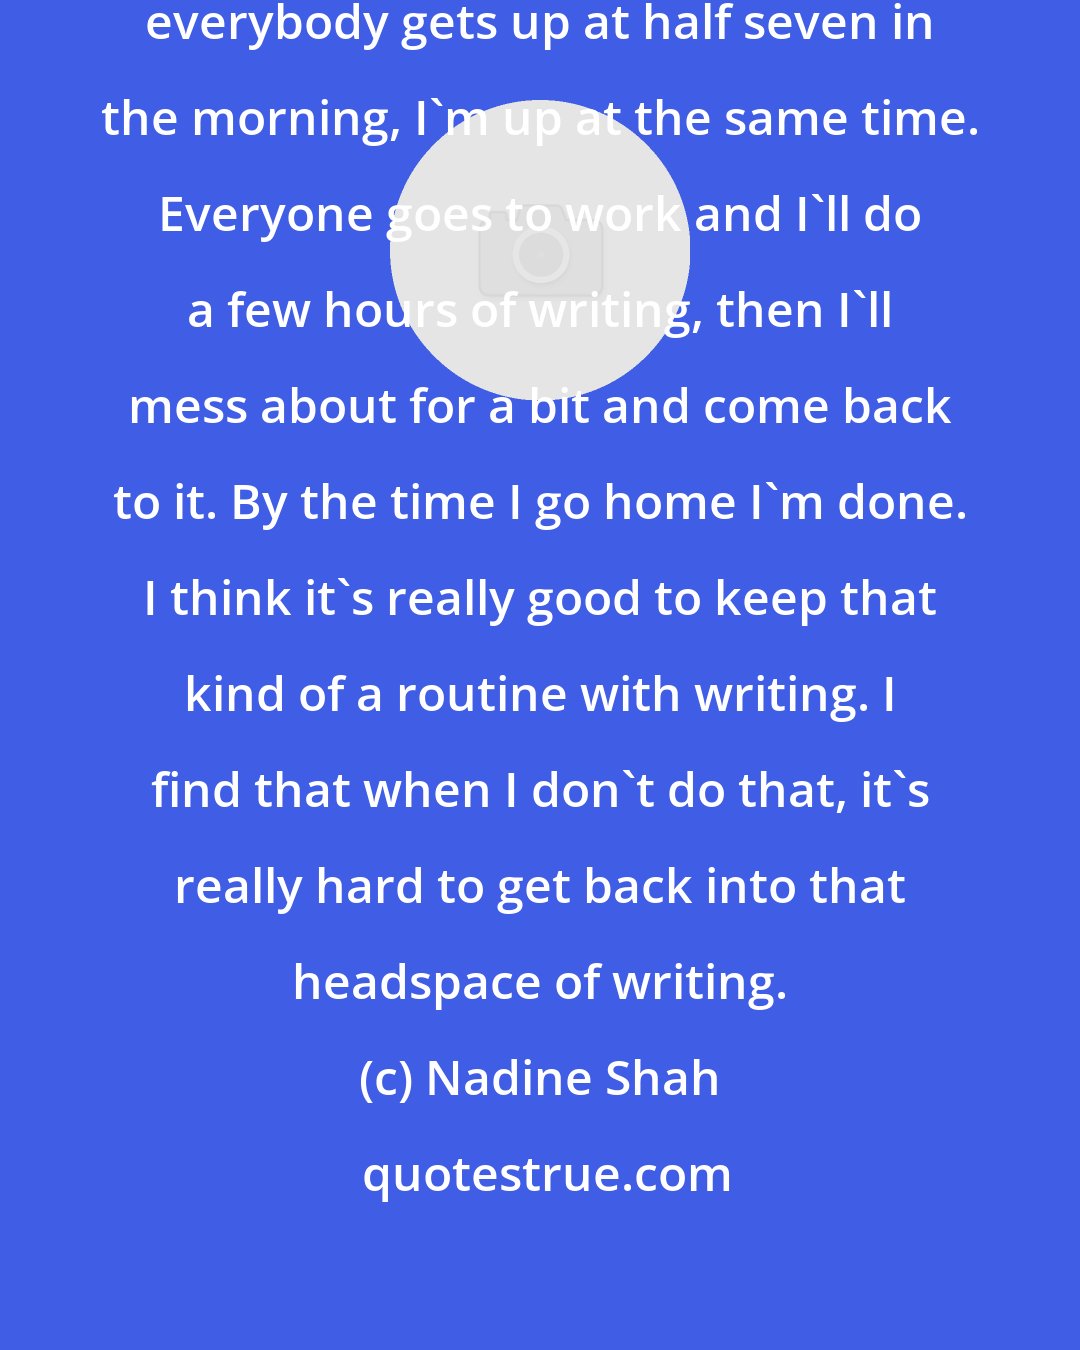 Nadine Shah: I hate being called lazy, so when everybody gets up at half seven in the morning, I'm up at the same time. Everyone goes to work and I'll do a few hours of writing, then I'll mess about for a bit and come back to it. By the time I go home I'm done. I think it's really good to keep that kind of a routine with writing. I find that when I don't do that, it's really hard to get back into that headspace of writing.